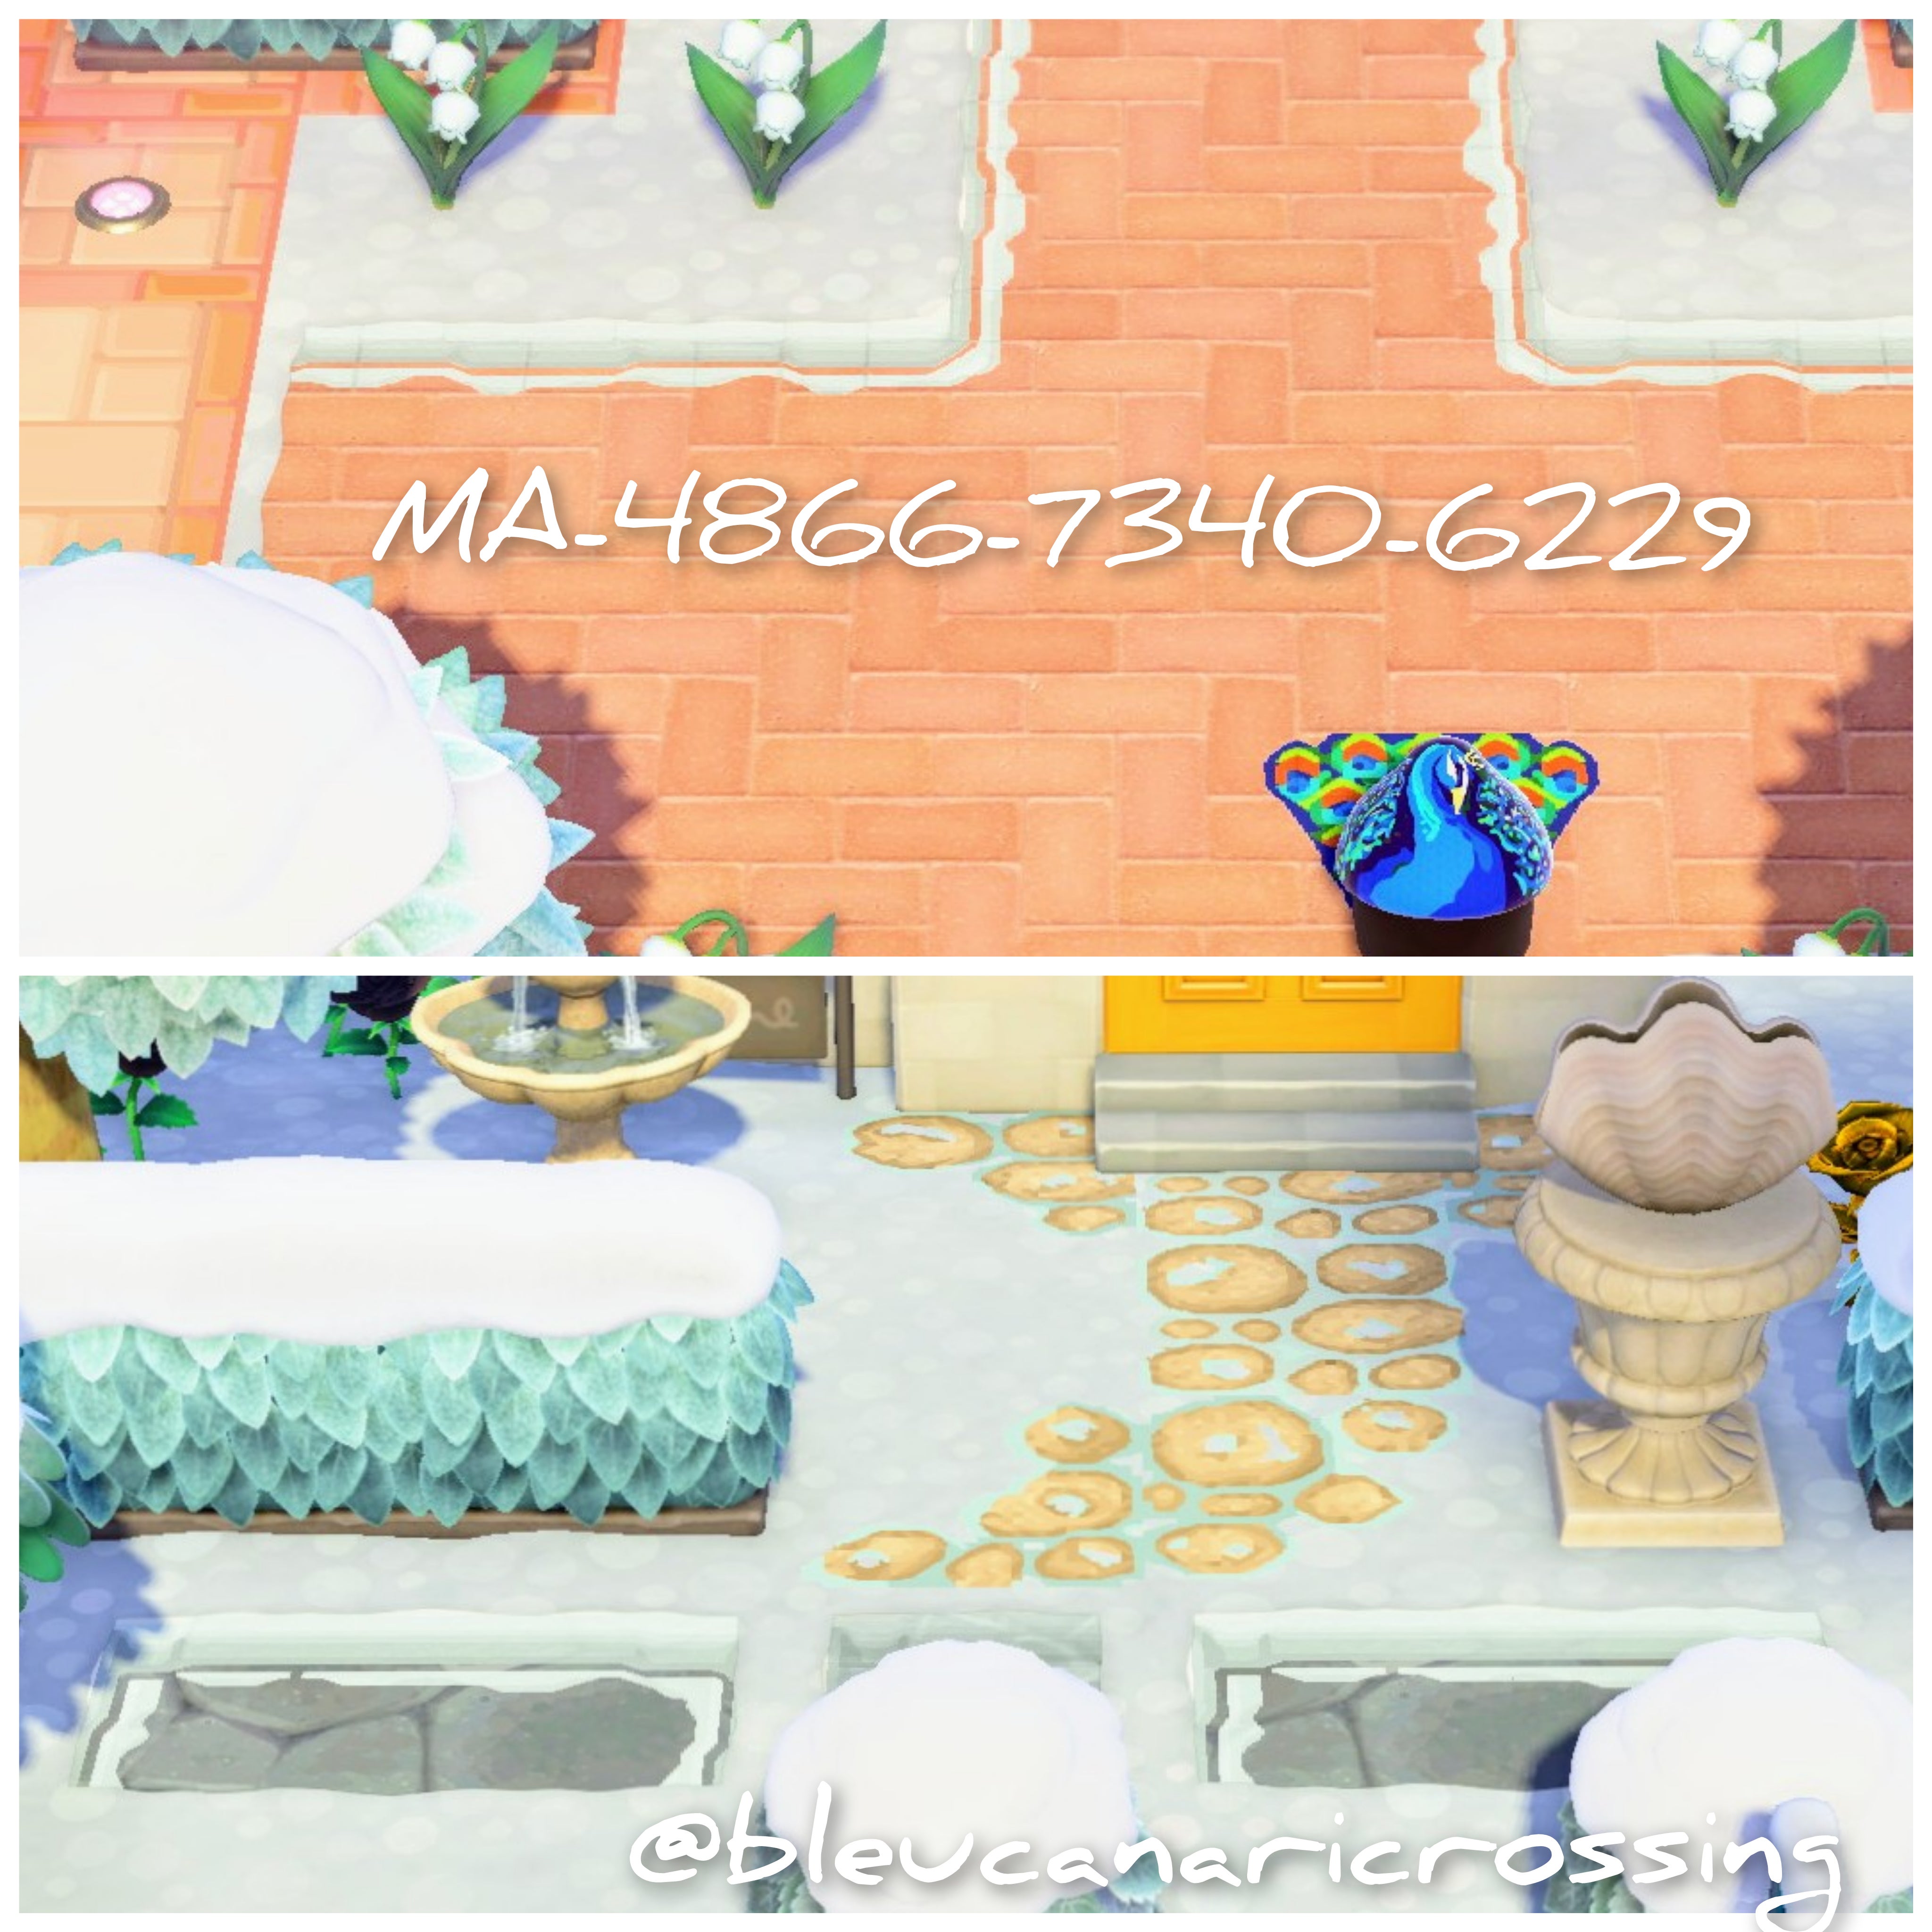 Animal Crossing Added exterior corner designs to my shoveled path